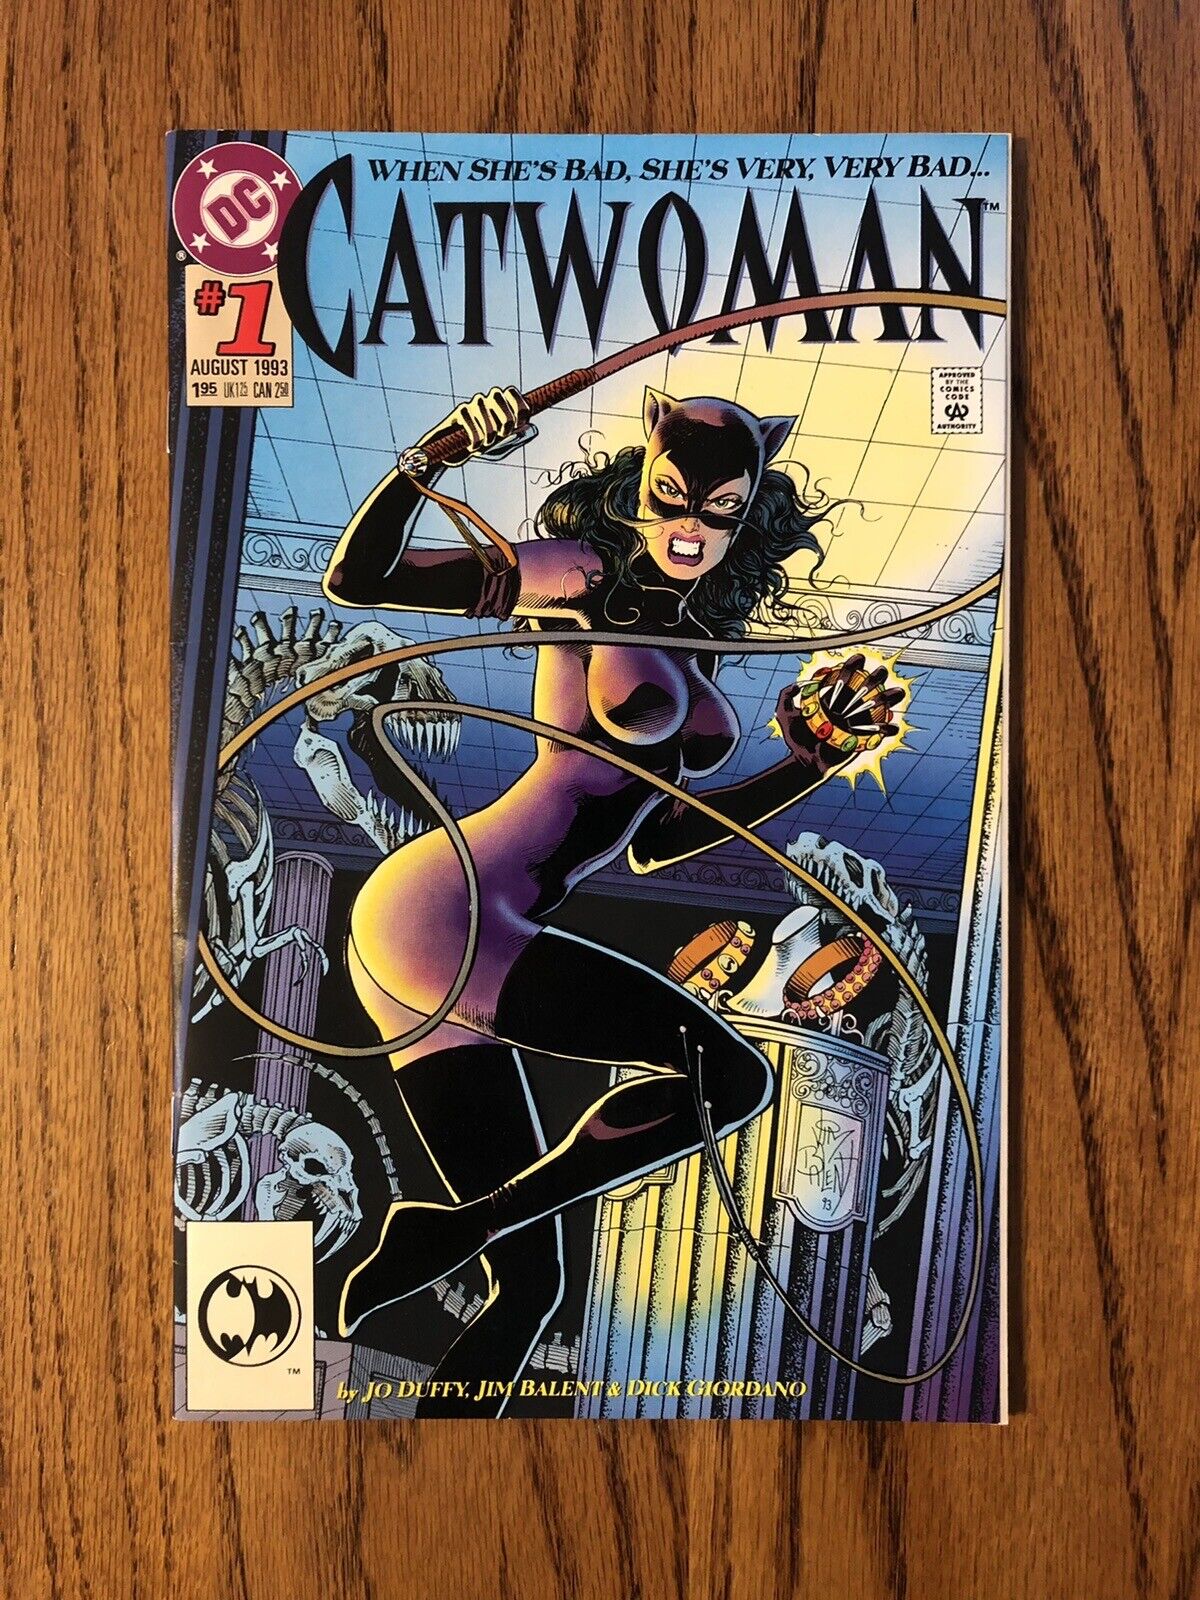 1993 DC Comics - Catwoman - #1 - When Shes Bad Shes Very Very Bad